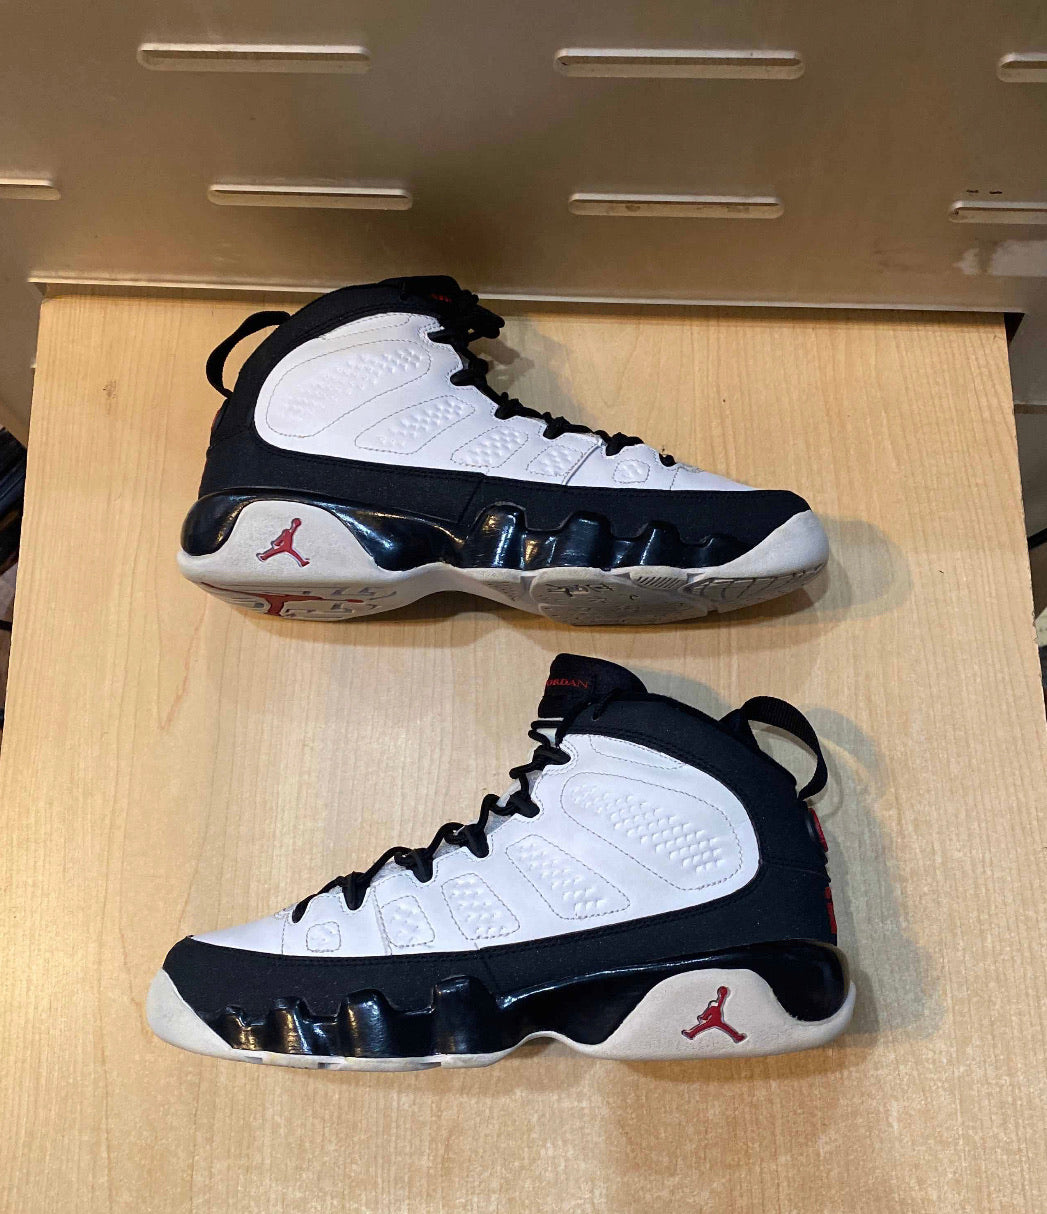 Playoff 9s Size 6Y